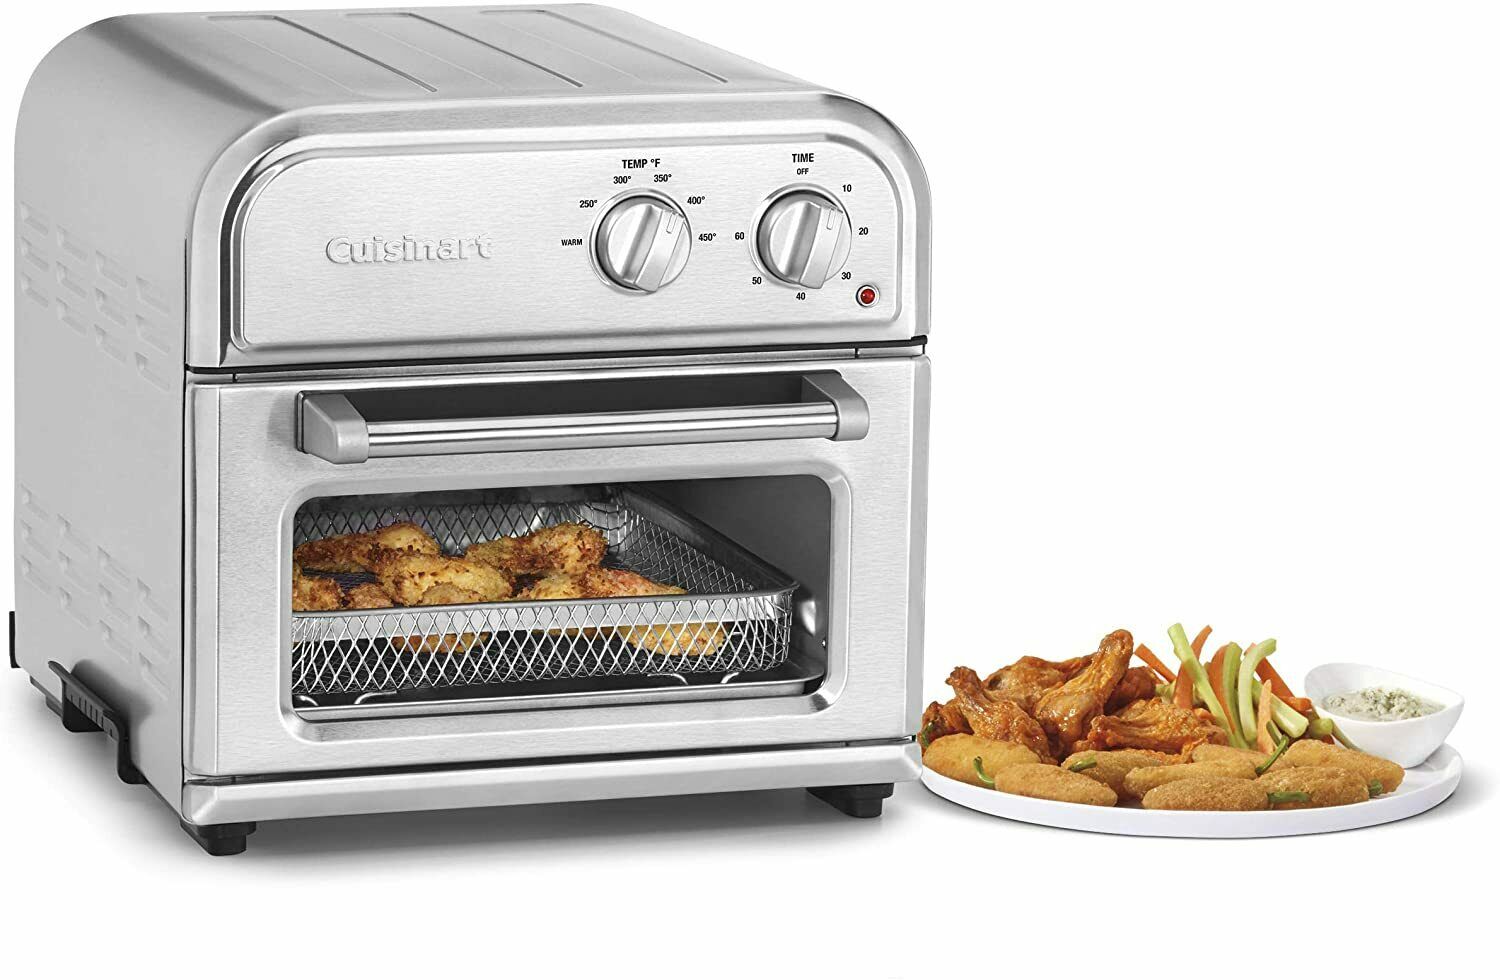 Cuisinart AFR-25 Compact Air Fryer - Brushed Stainless Steel - image 3 of 5